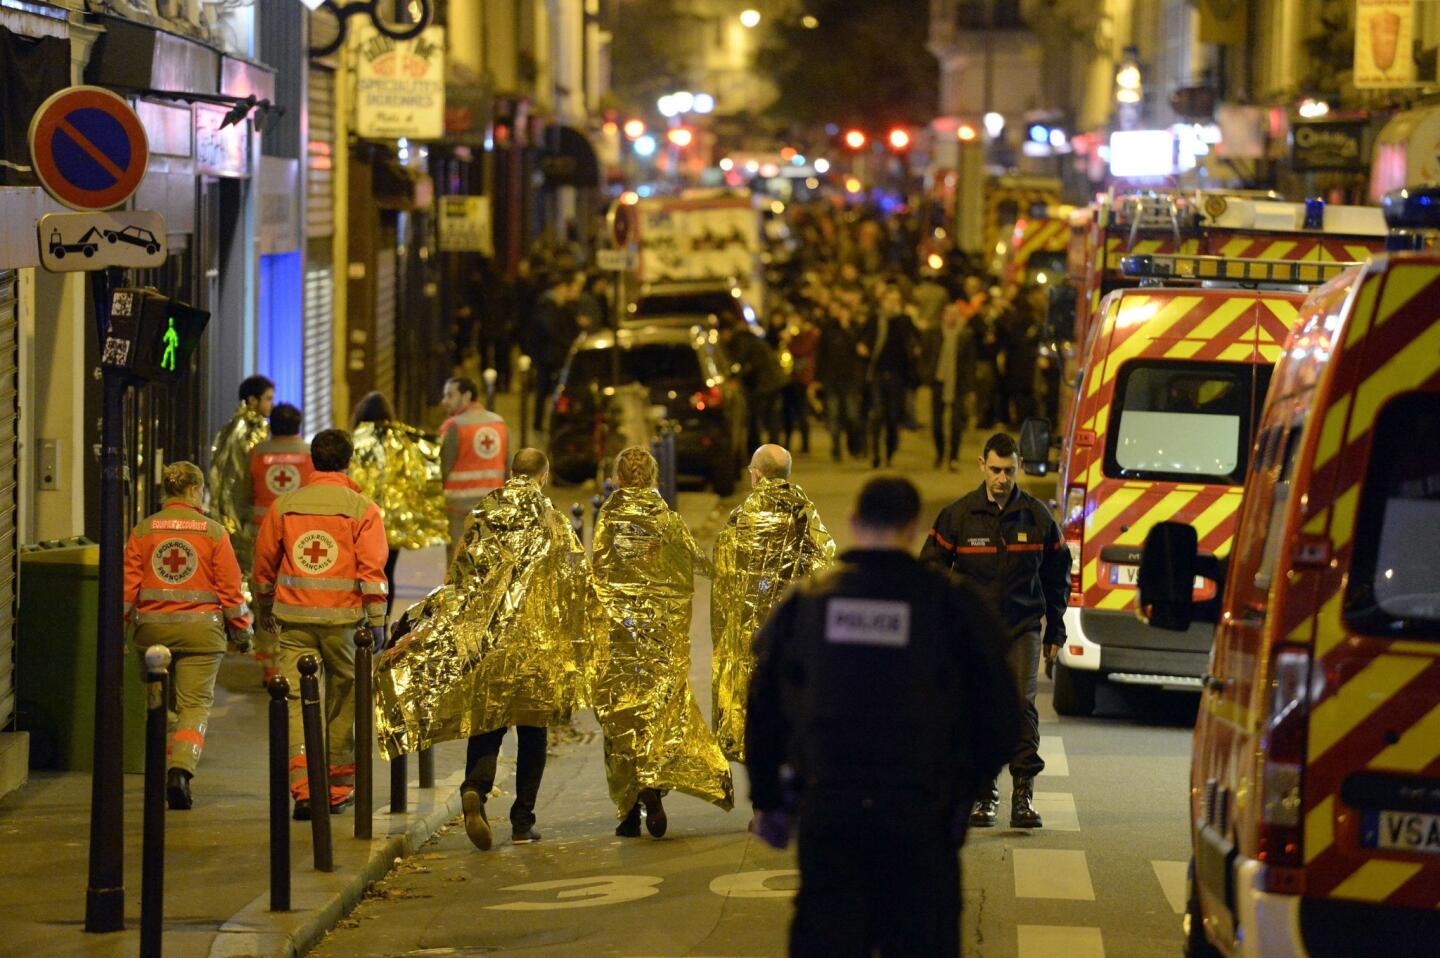 People are evacuated near the Bataclan concert hall early on Nov. 14, 2015, after an attack at the Parisian concert hall.